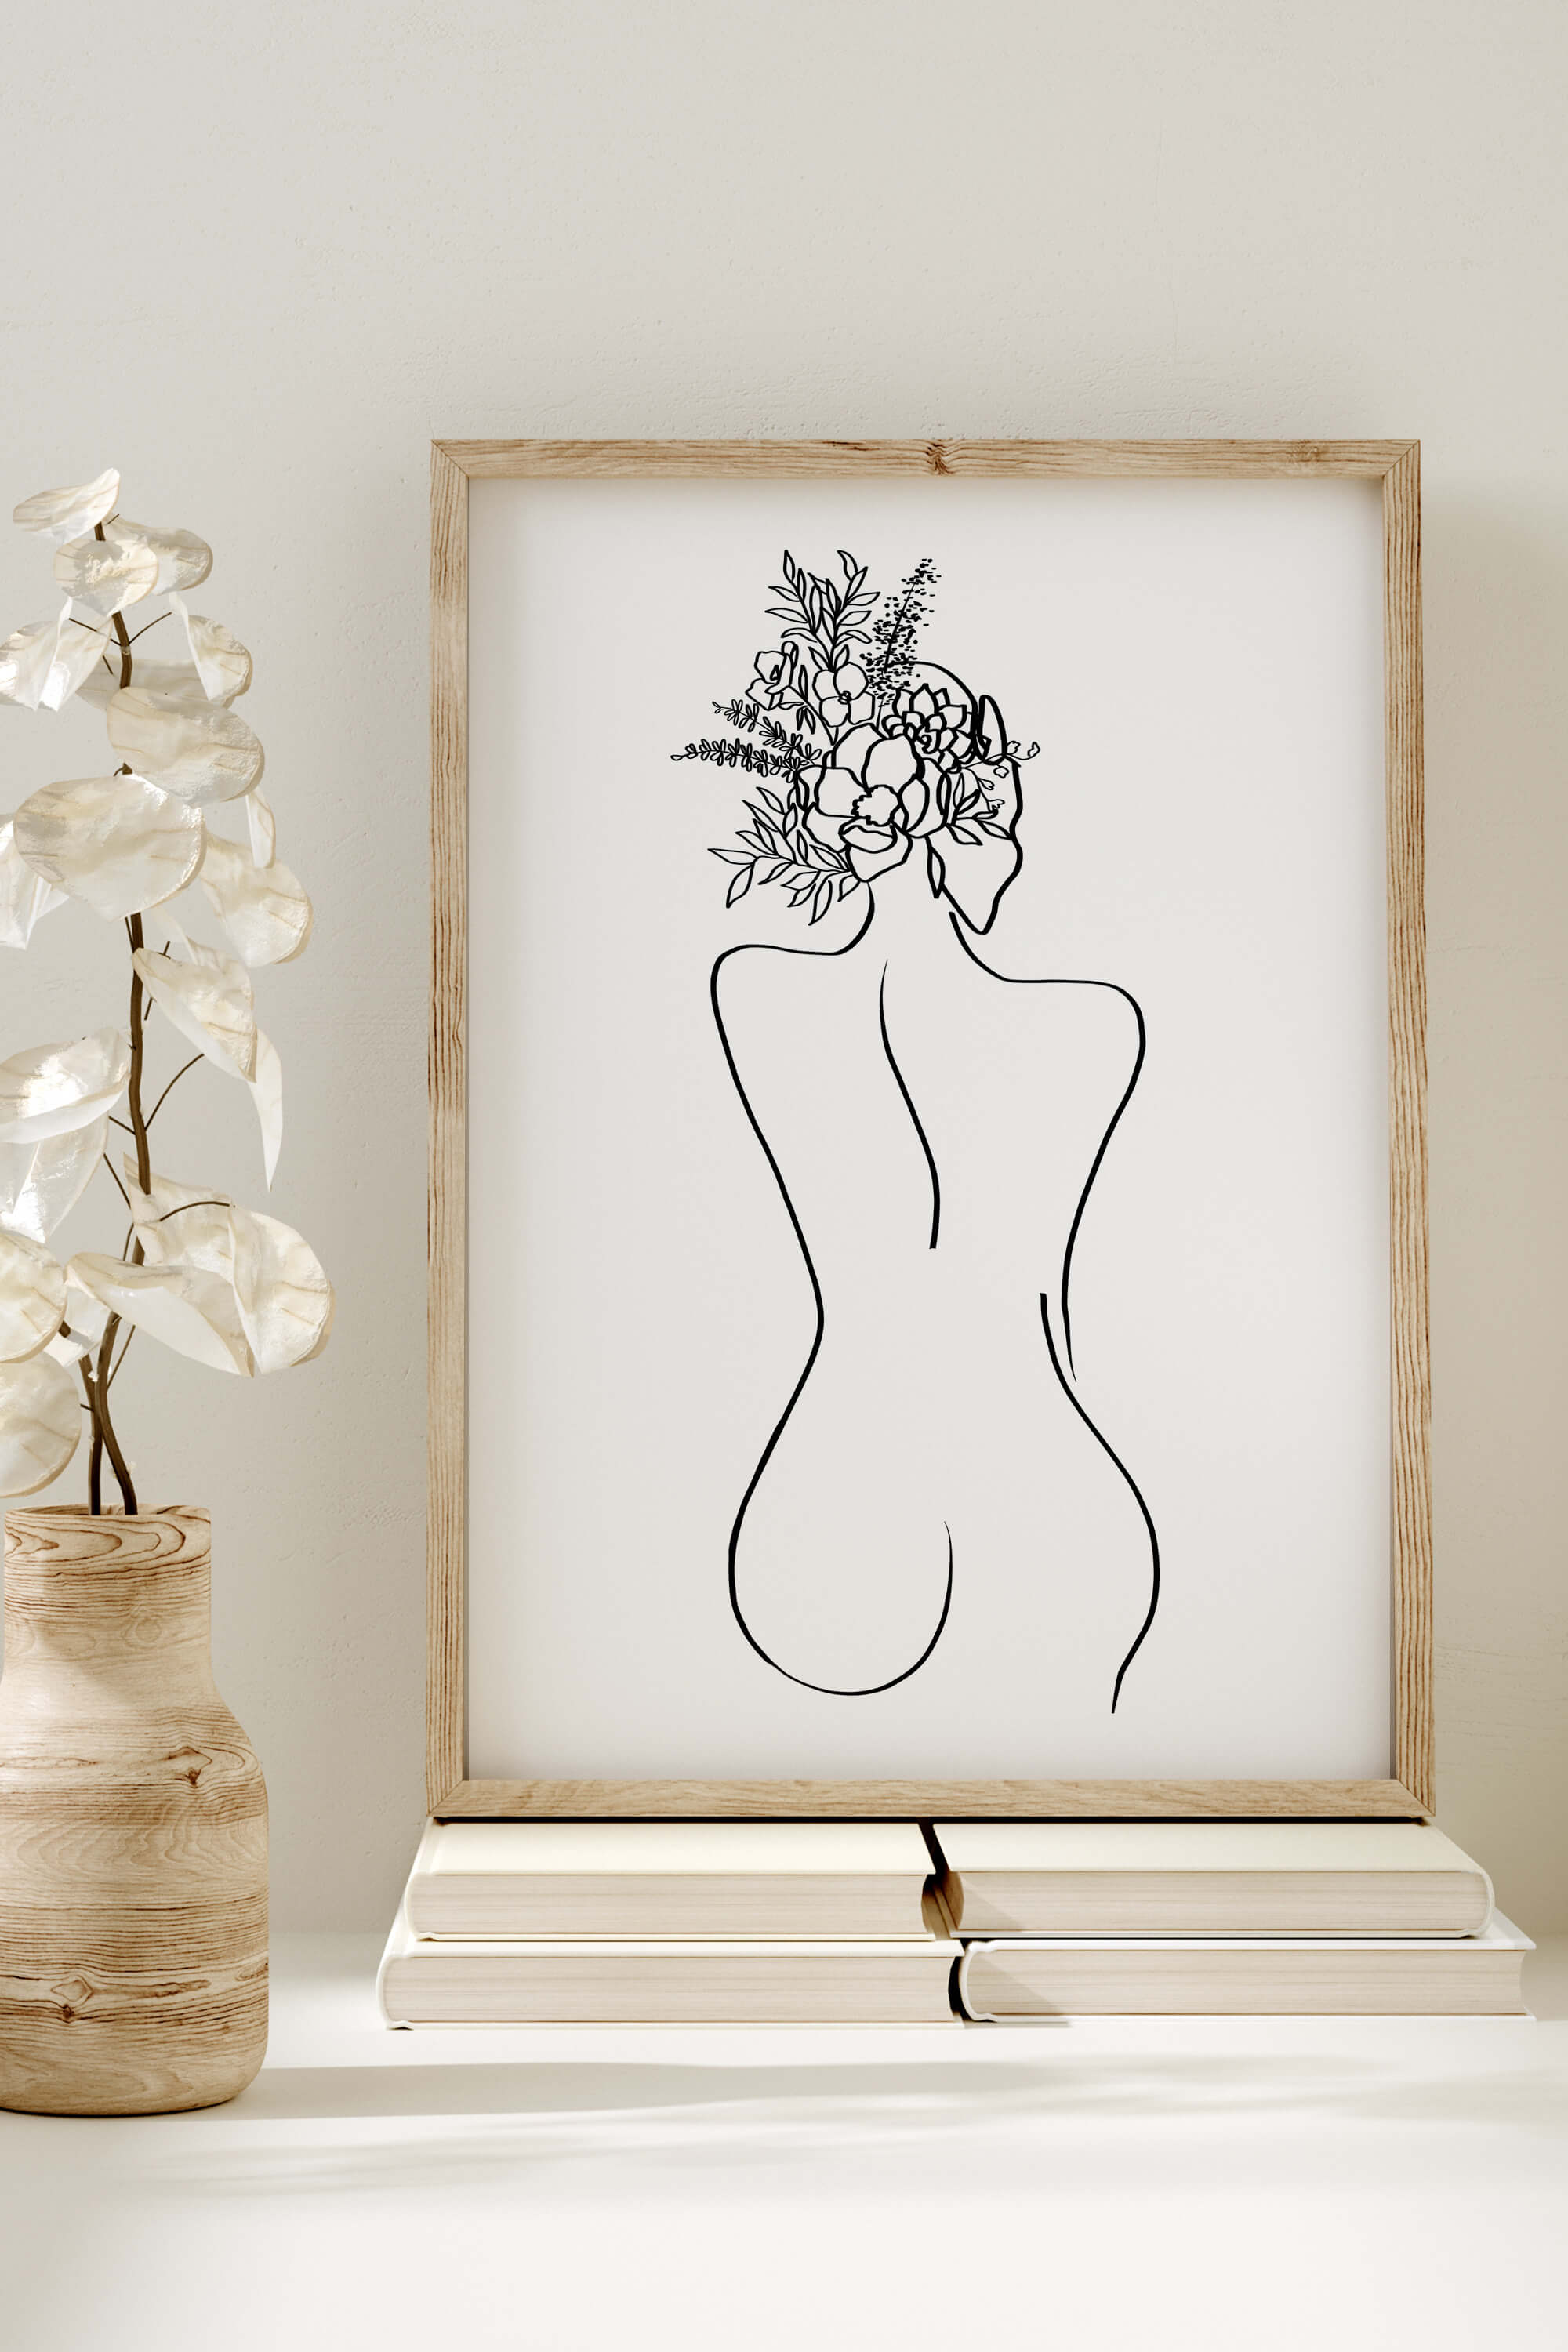 Explore the synergy between a flower head and a female body in this carefully illustrated print. A visual story of empowerment and natural beauty unfolds in this captivating artwork.